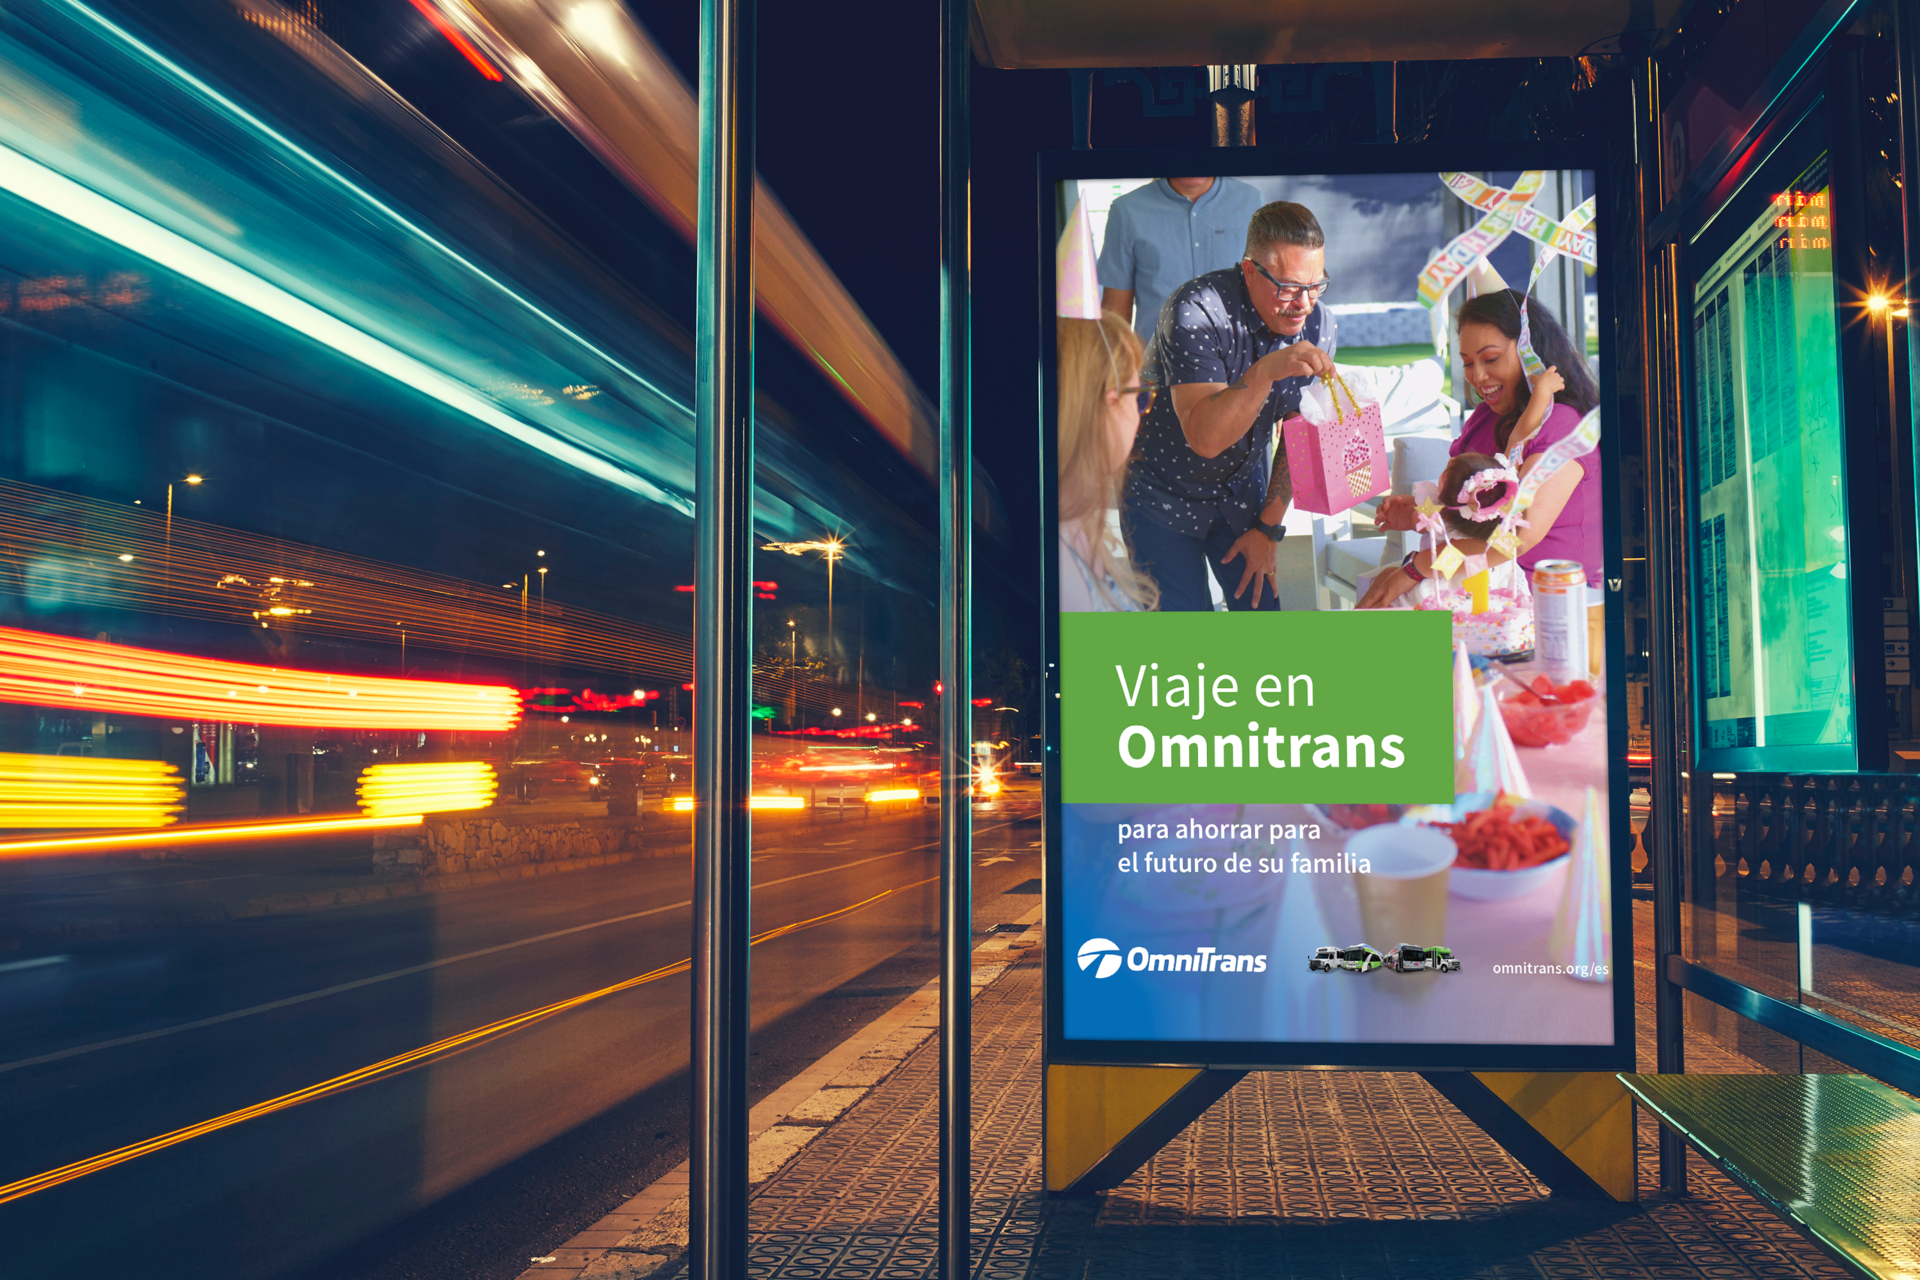 Omnitrans Spanish First bus stop ad